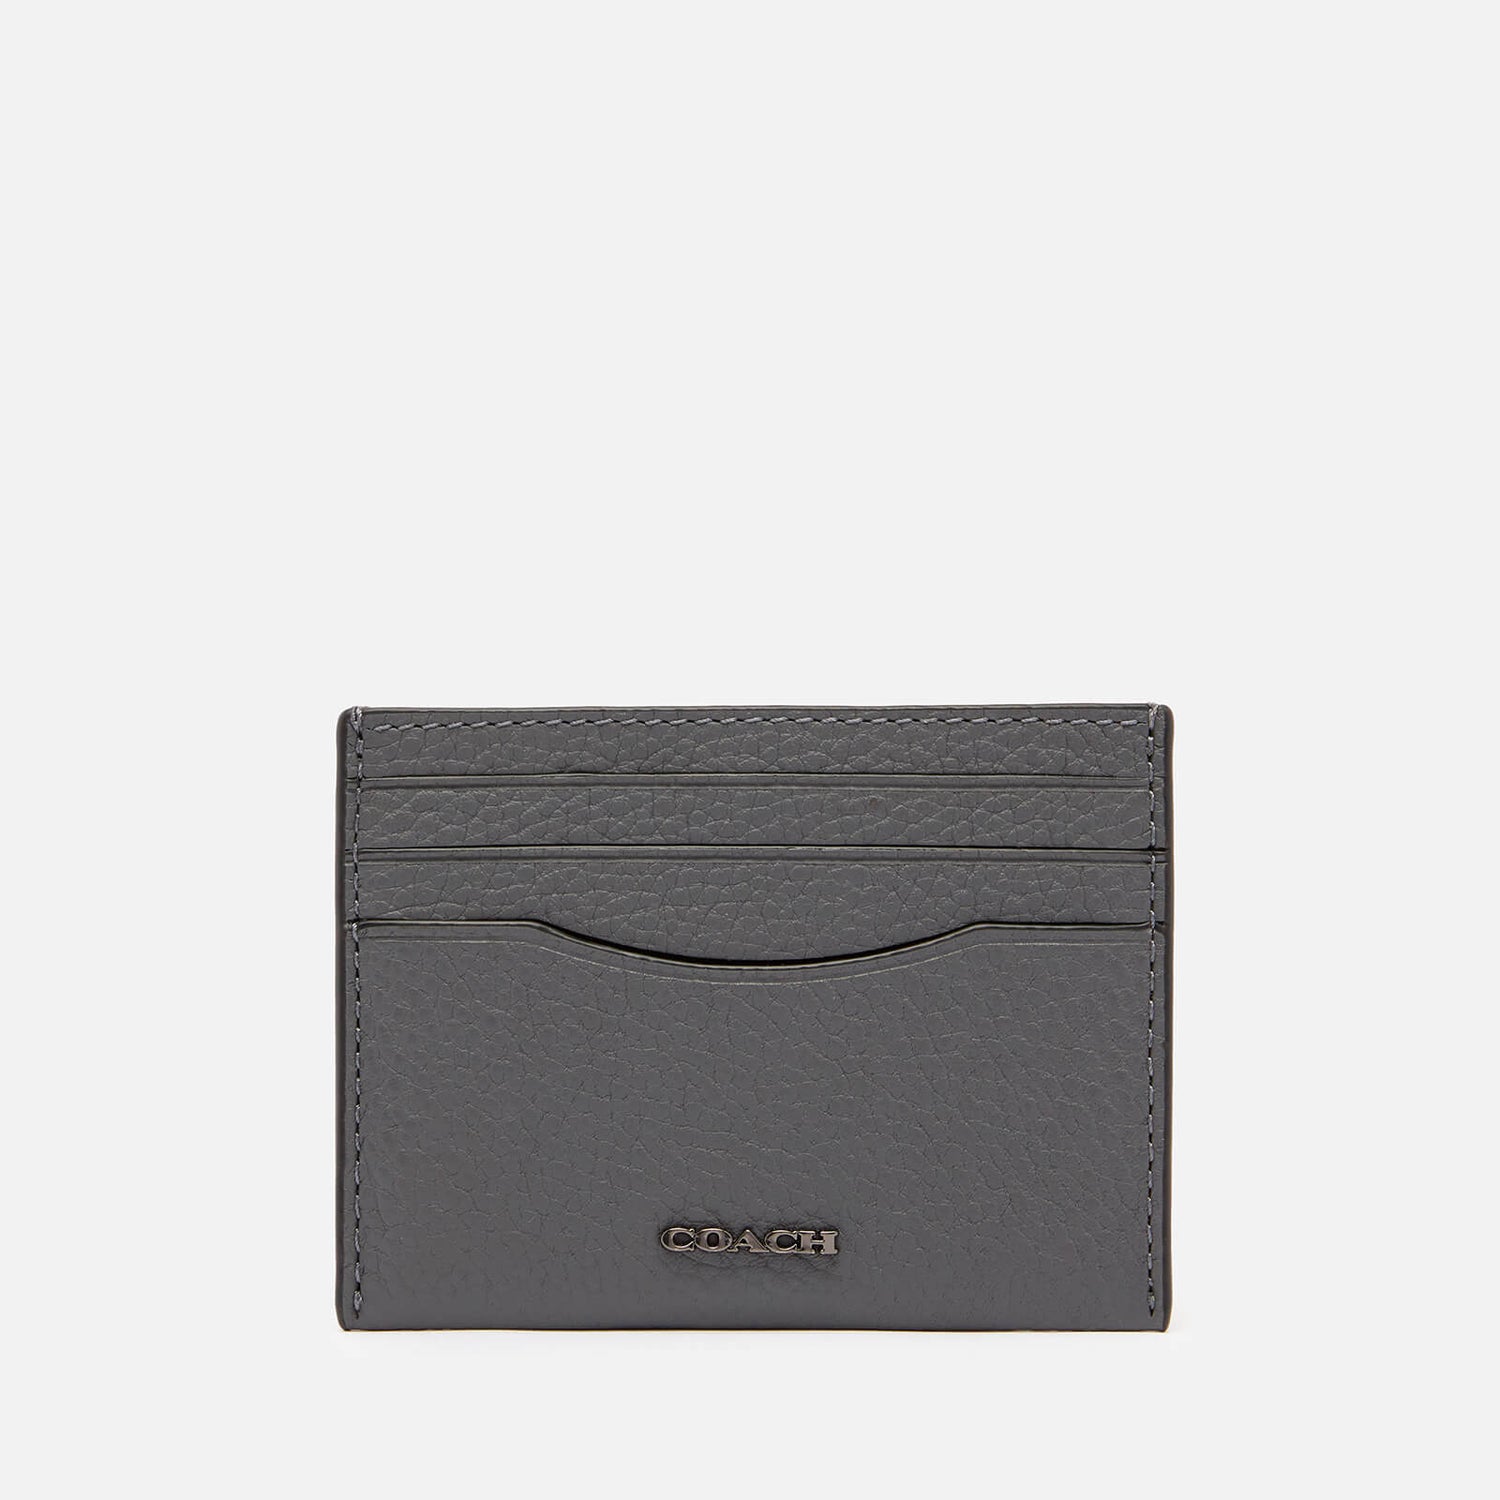 Coach Men's Pebble Leather Card Case - Graphite - Free UK Delivery ...